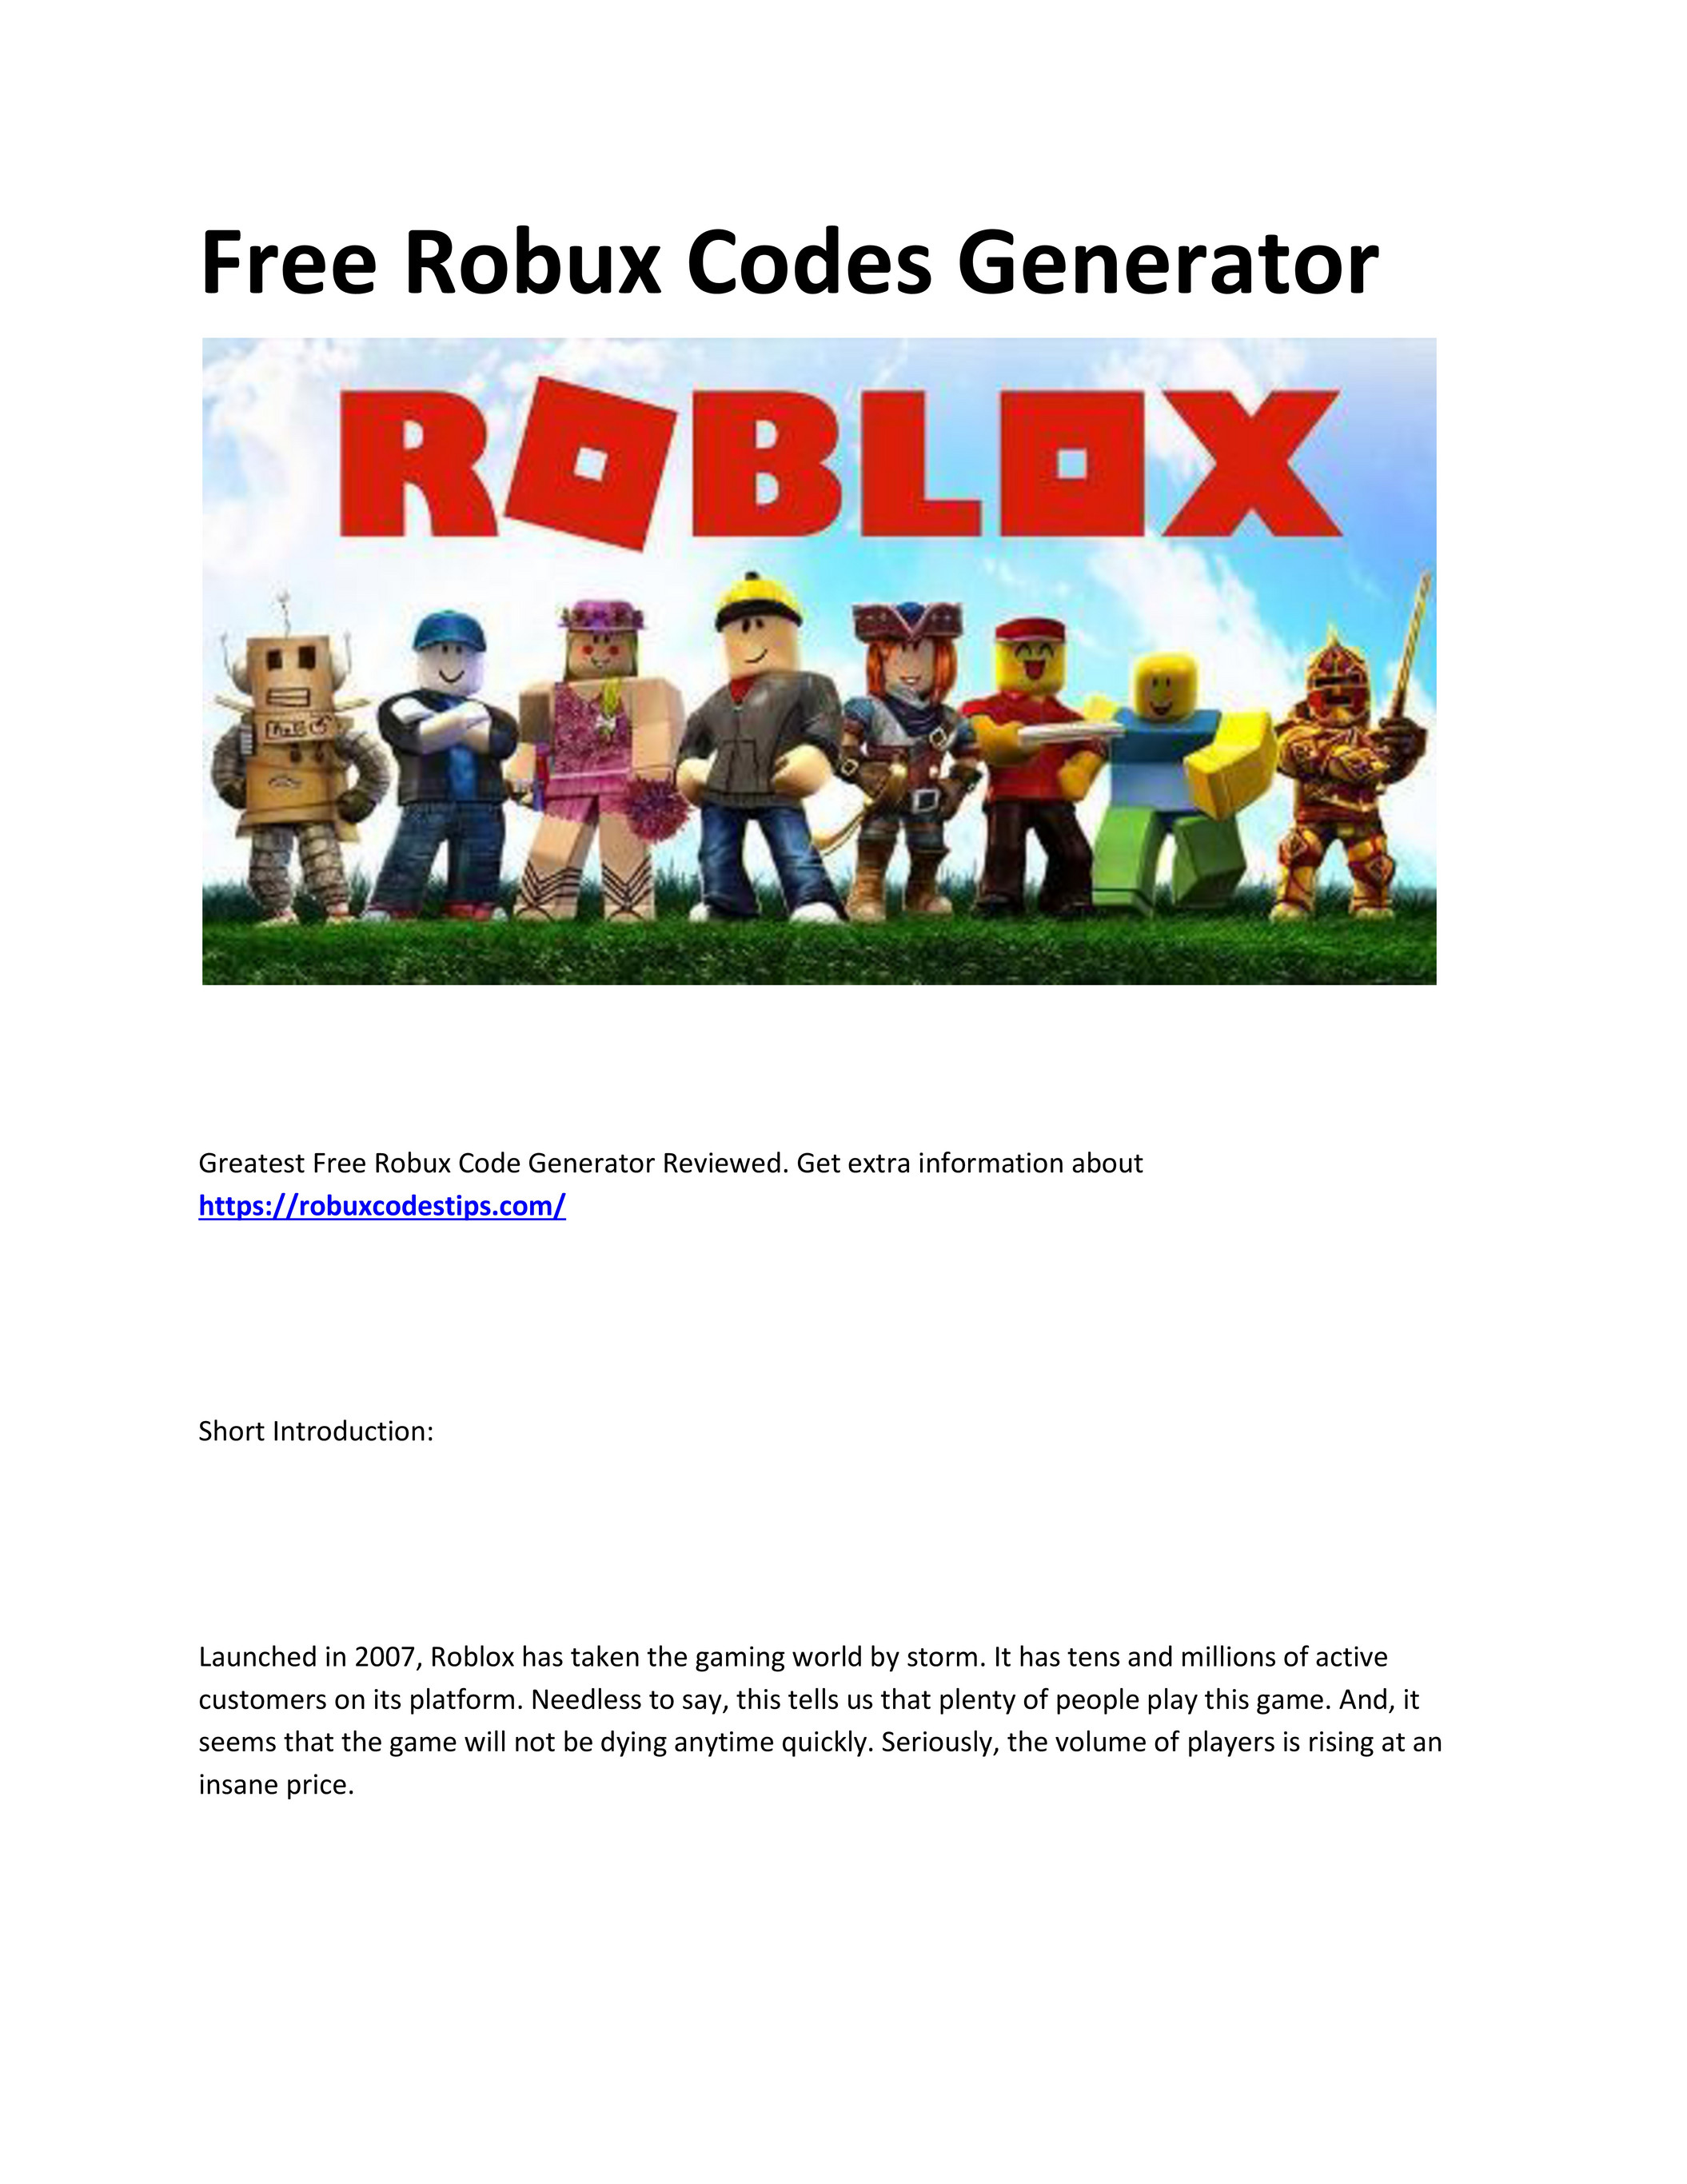 Free Robux Codes Generator 2020 5k Free Rubox Daily Page 1 Created With Publitas Com - roblox free code generator